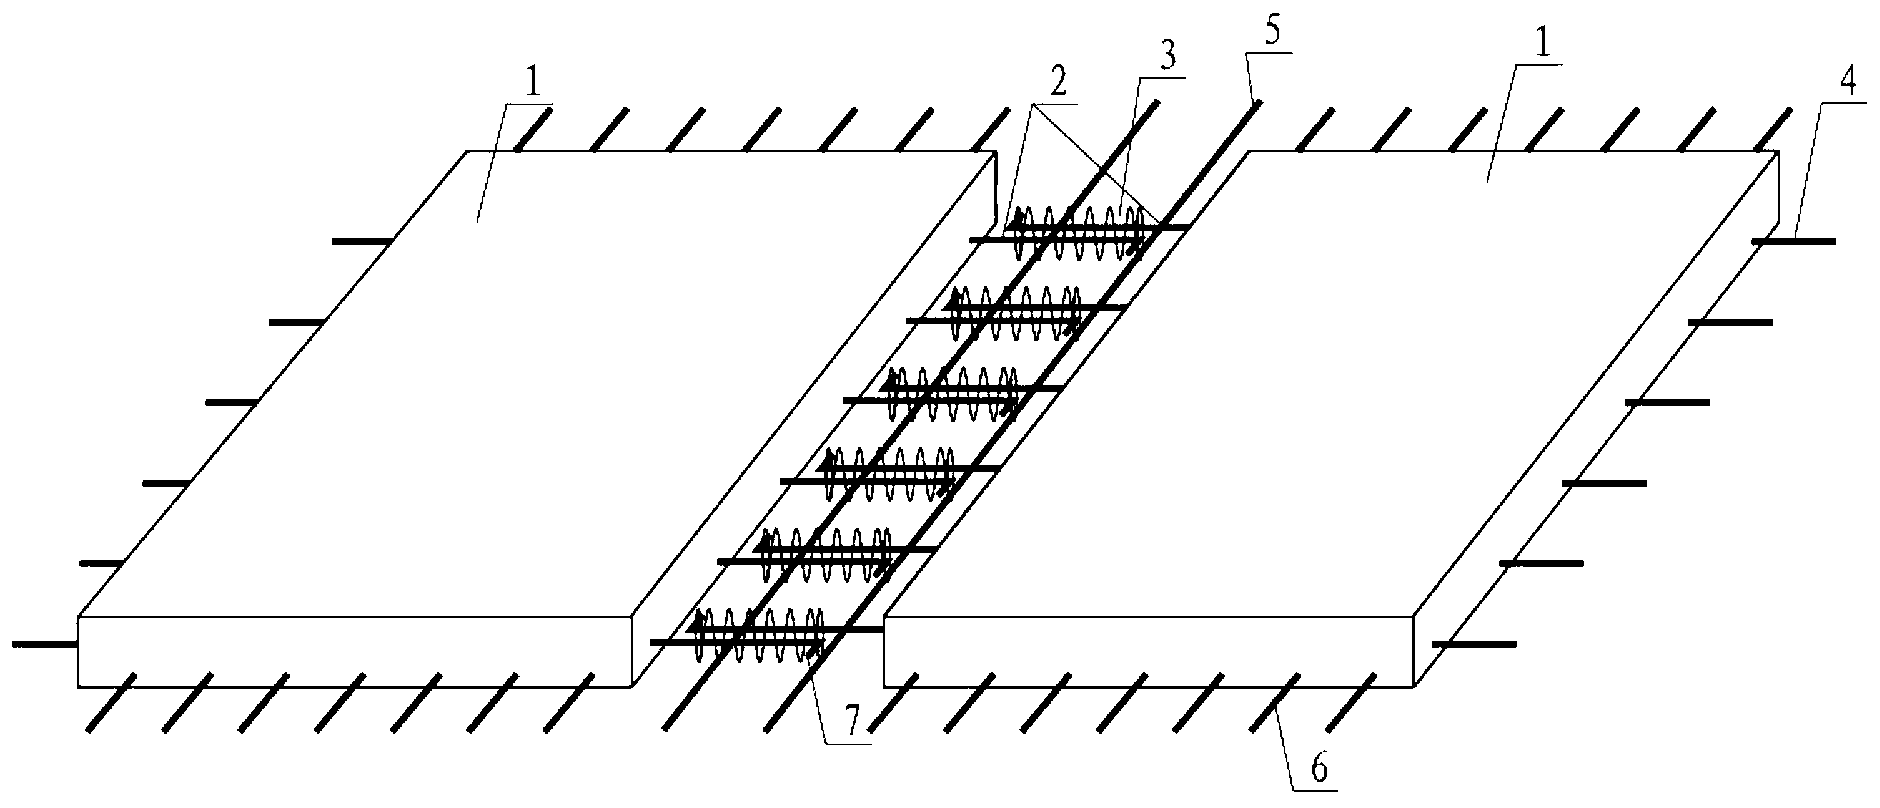 Method for splicing and connecting precast reinforced concrete floor slabs within span